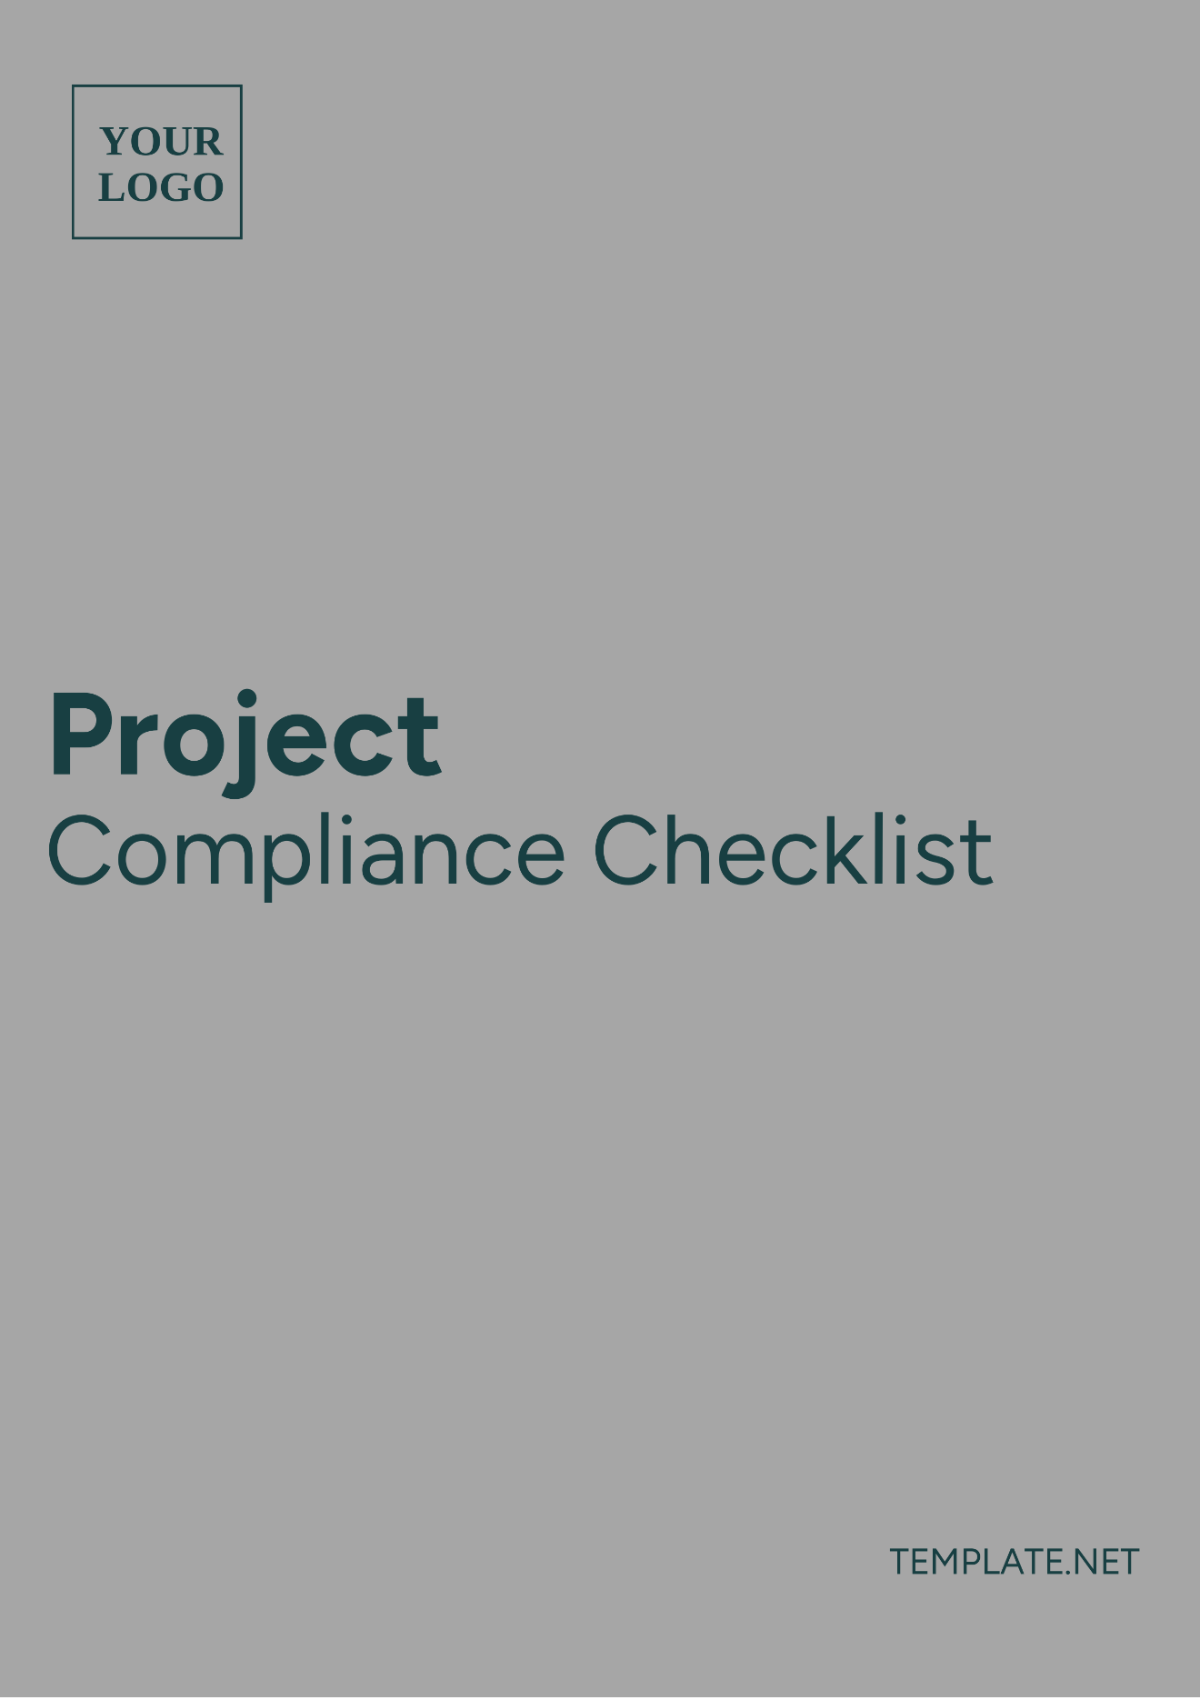 Project Compliance Checklist Template